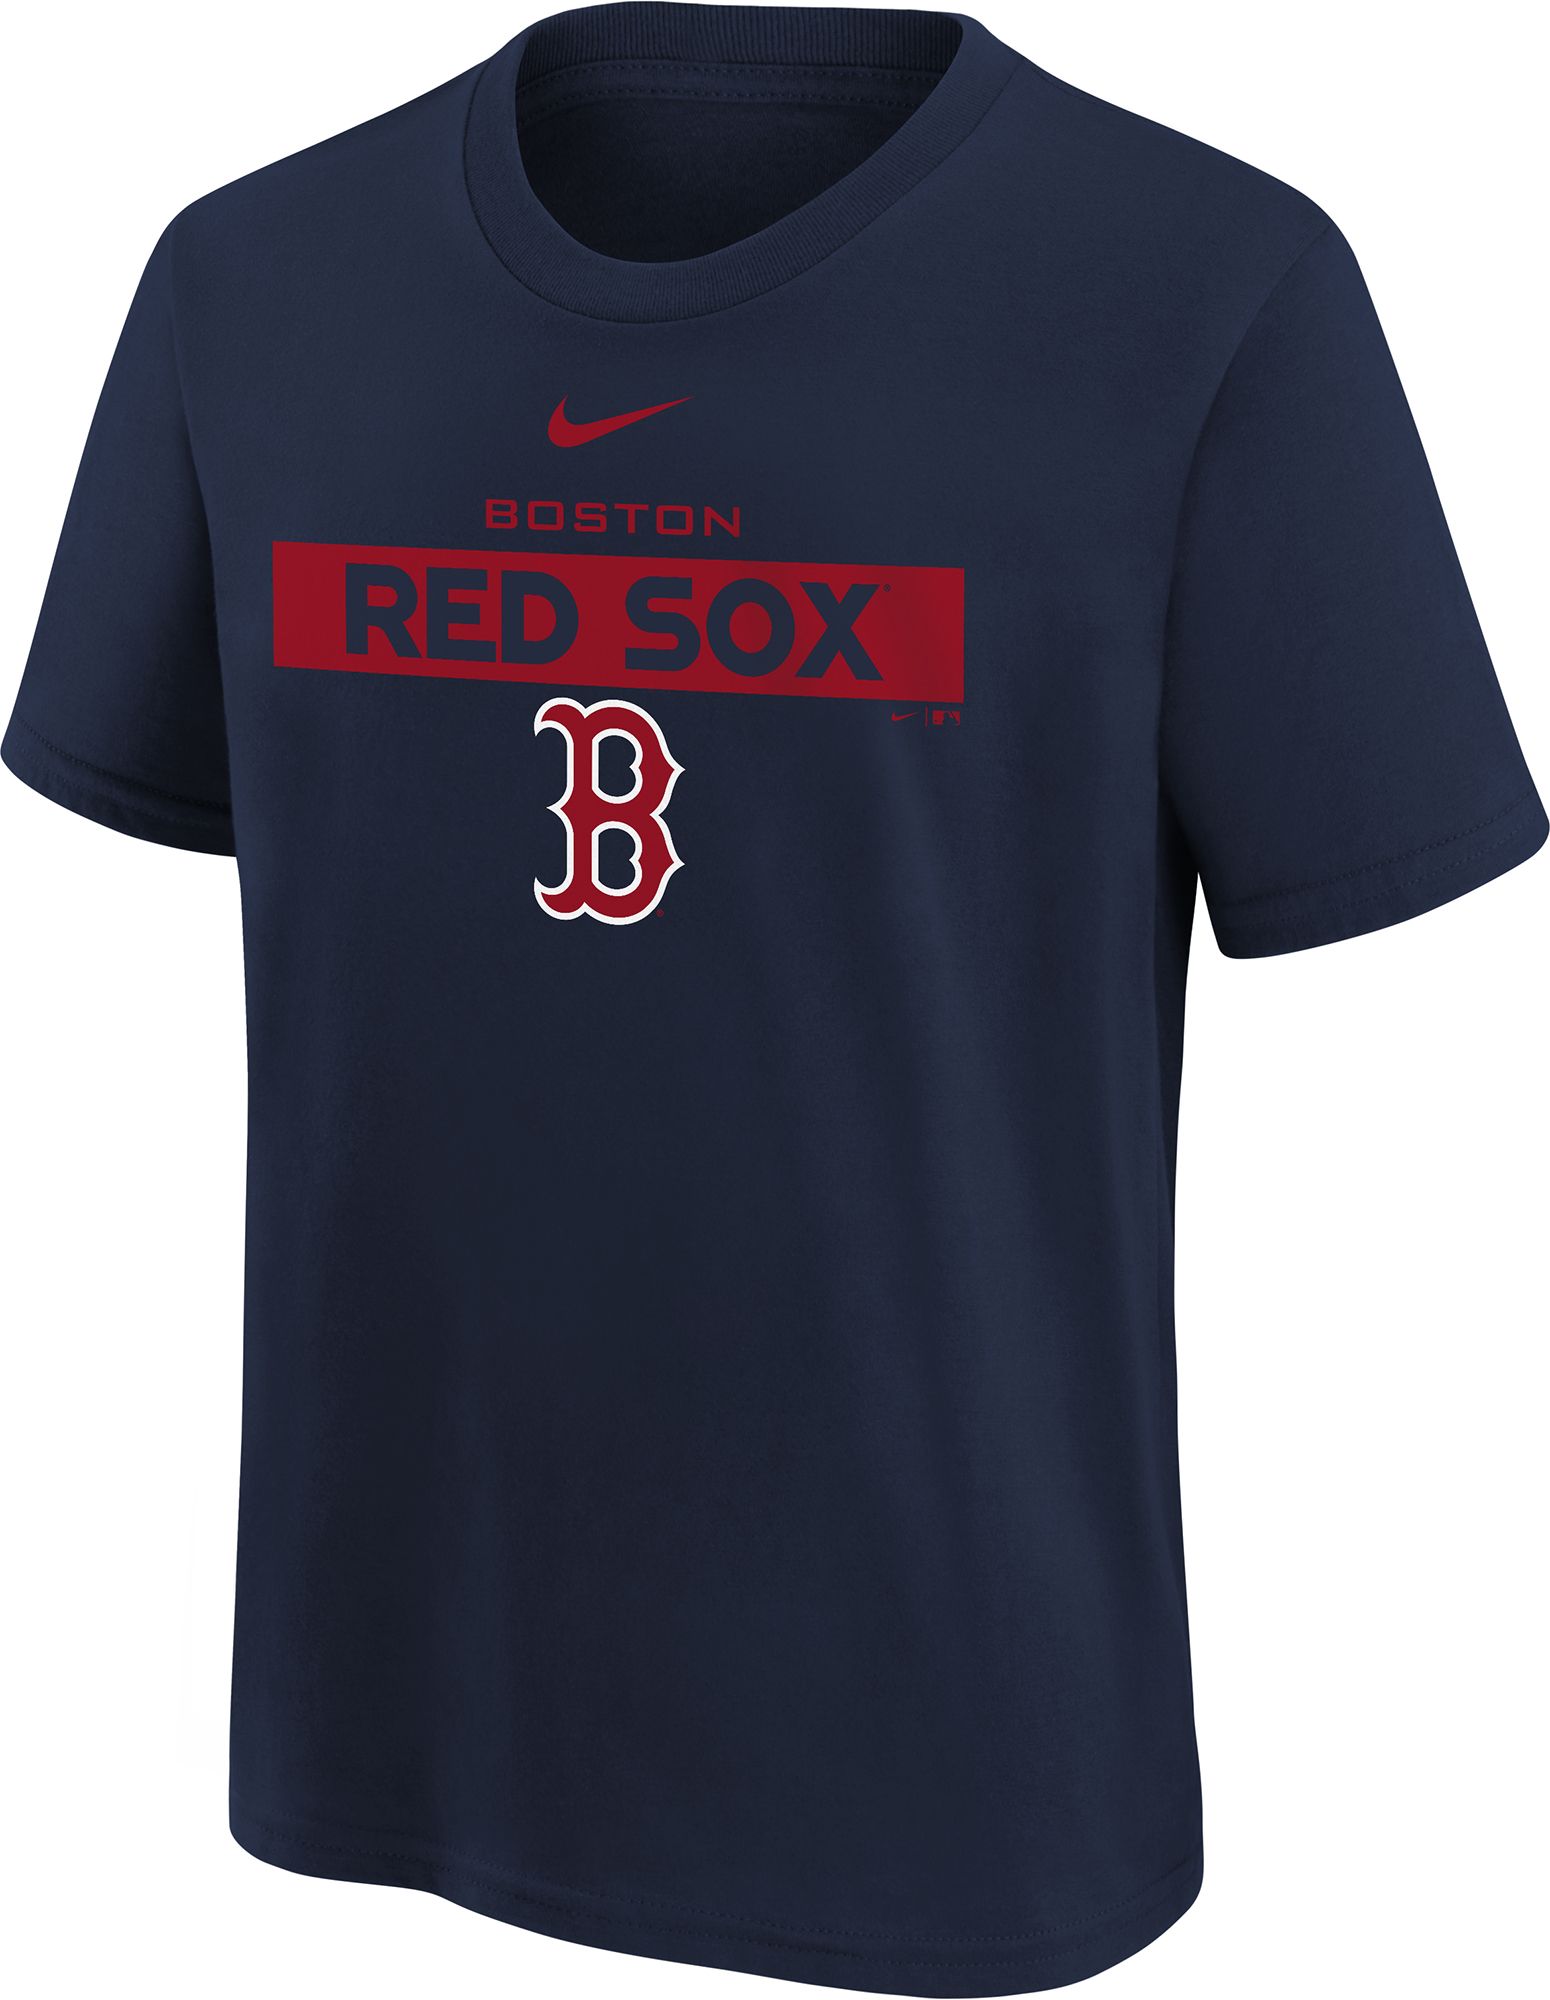 Youth Boys' Boston Red Sox Navy Issue T-Shirt